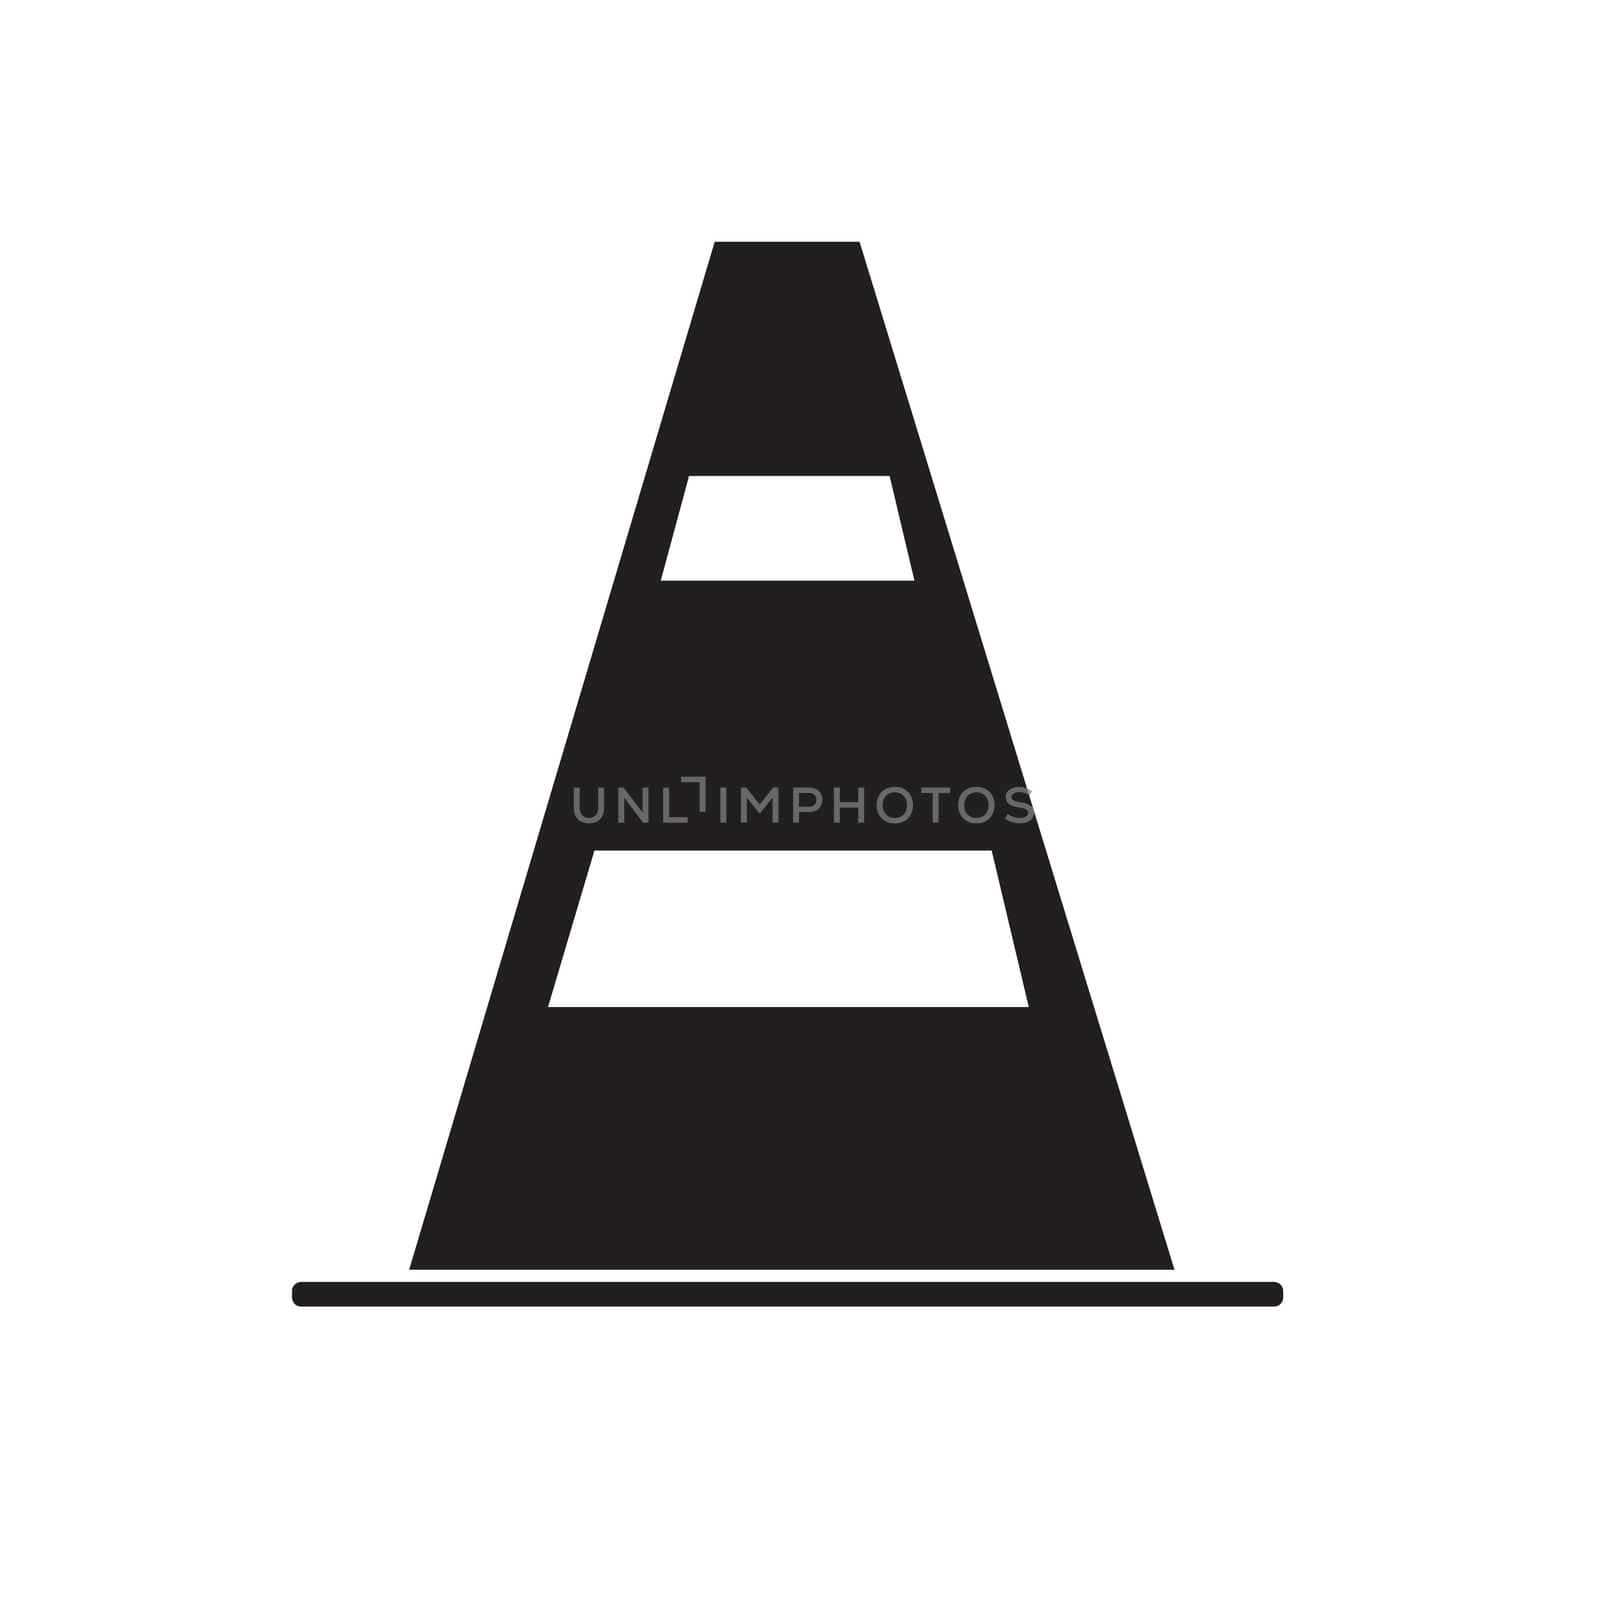 construction barrier icon on white background. construction barrier sign. flat style. traffic cone icon for your web site design, logo, app, UI. street warning symbol. road cone barrier sign.